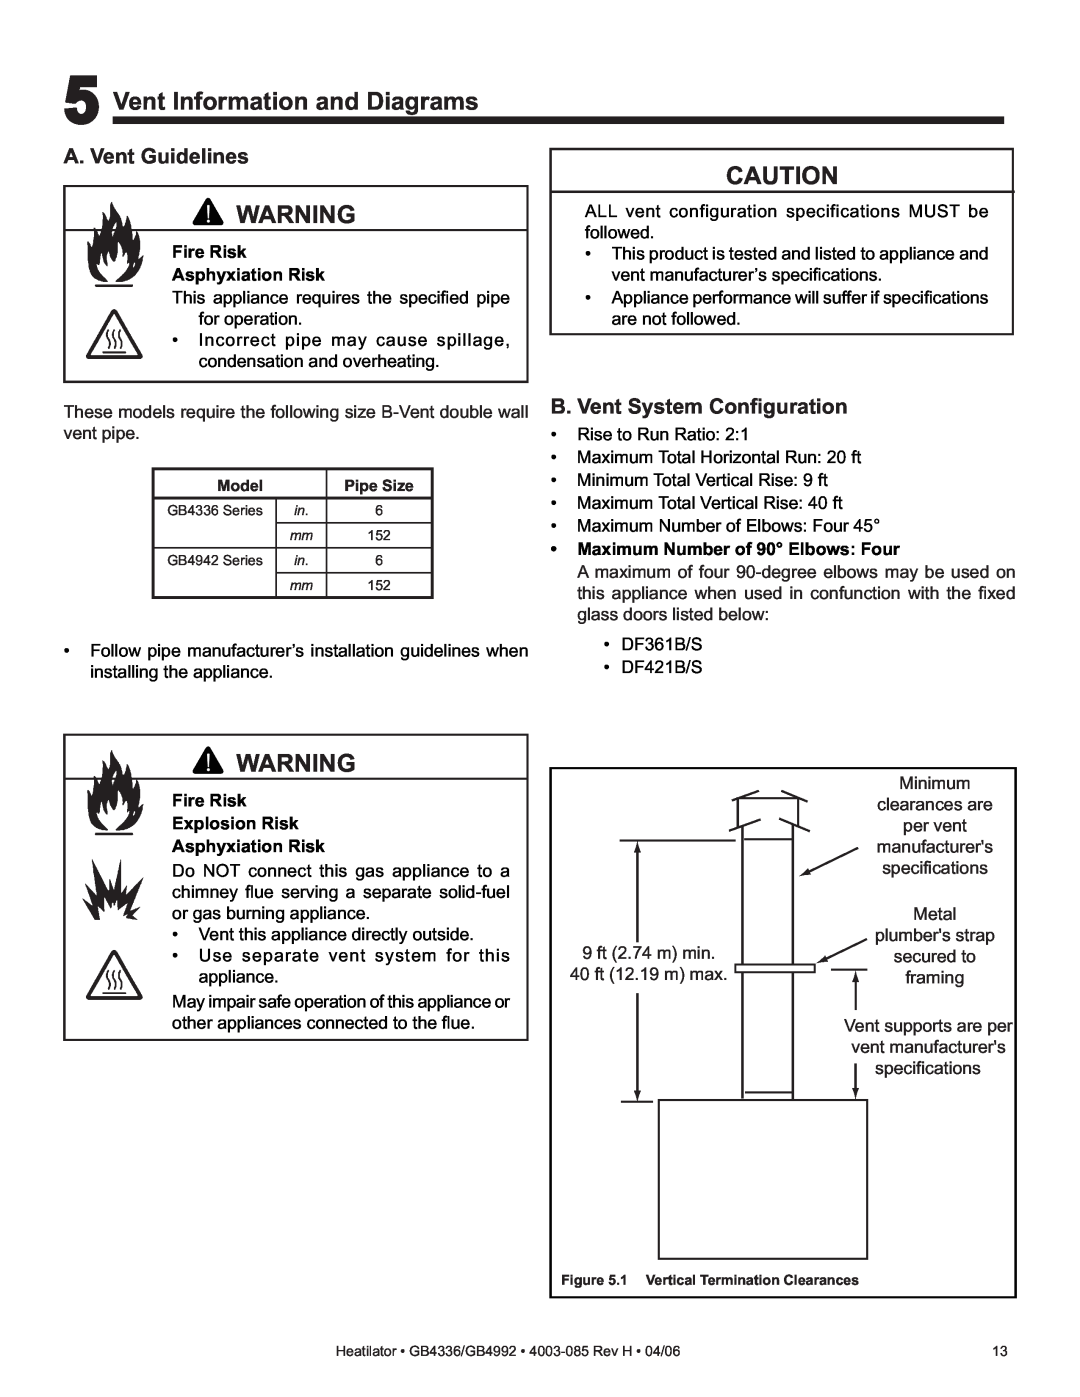 Heatiator GB4336 owner manual 5Vent Information and Diagrams, A. Vent Guidelines, B. Vent System Conﬁguration 